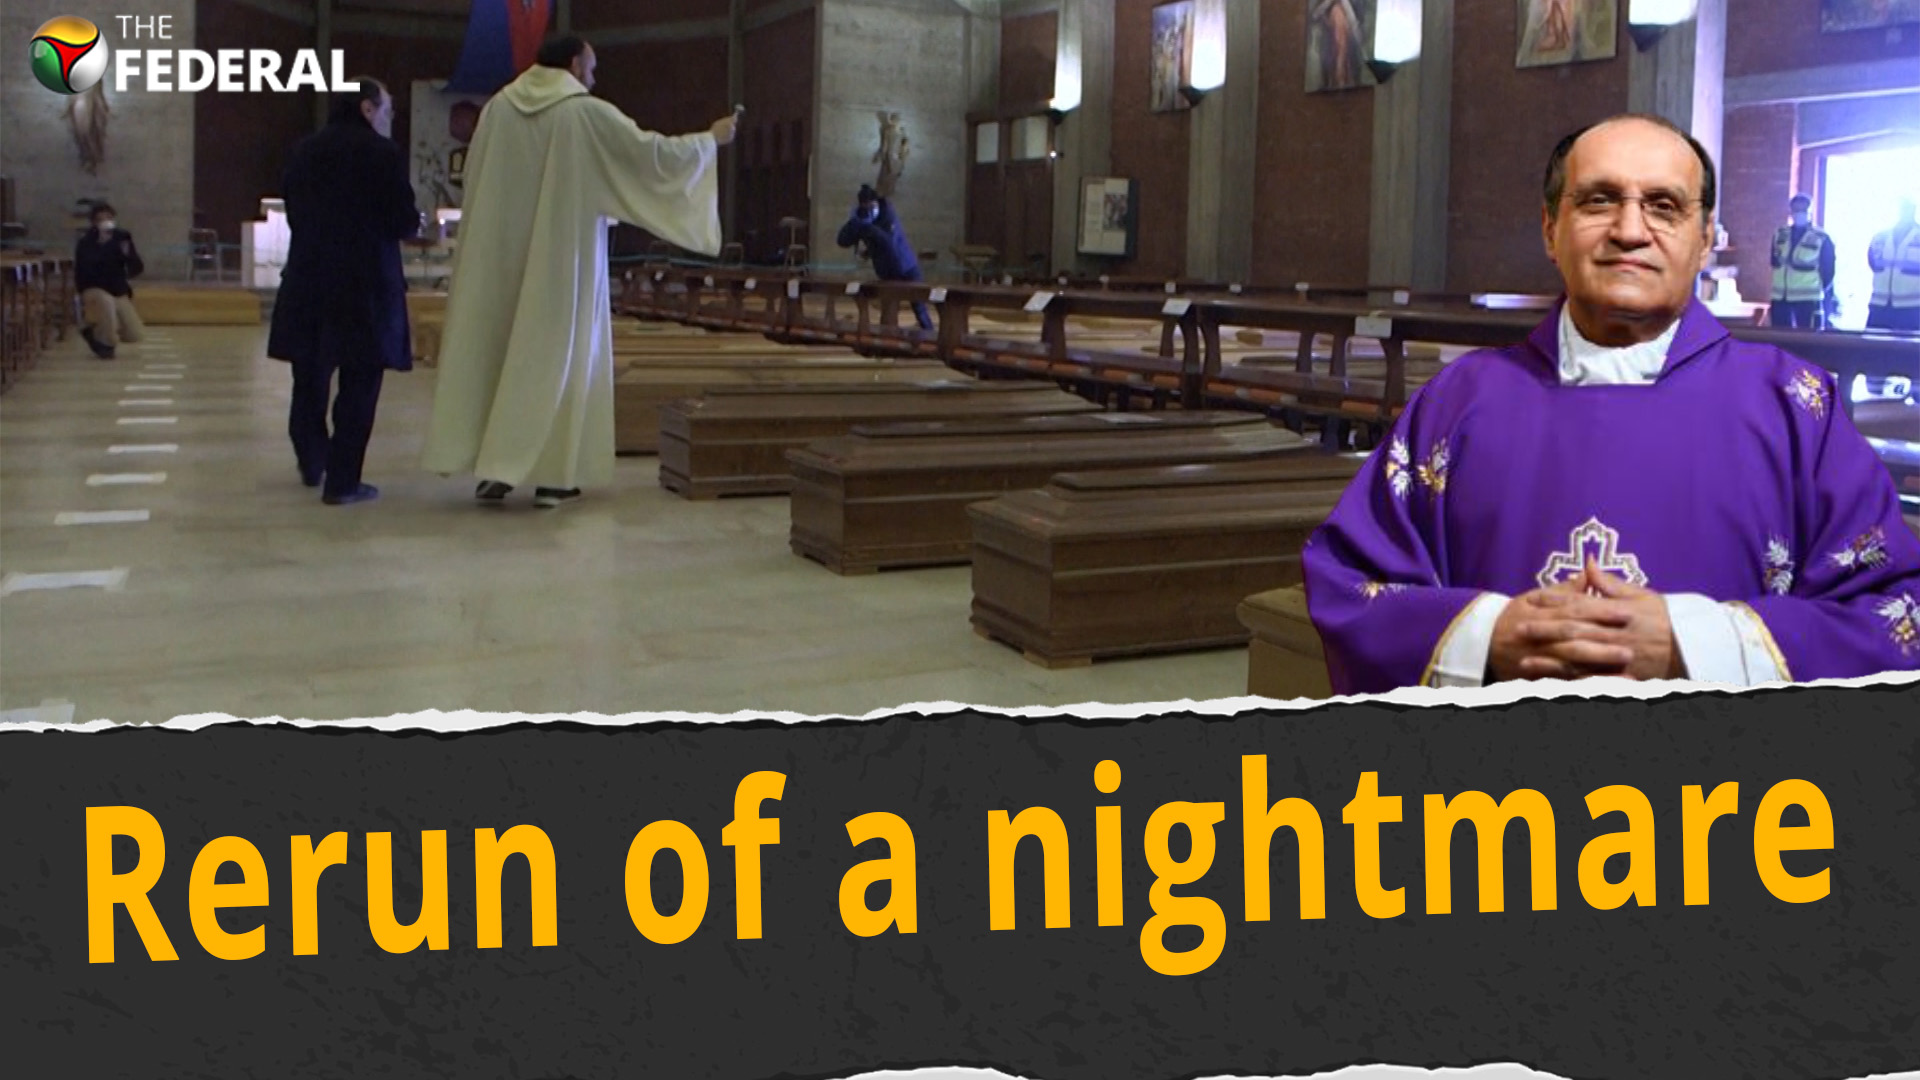 Coffins of COVID victims were lined up in his church. A year on, priest remembers the nightmare